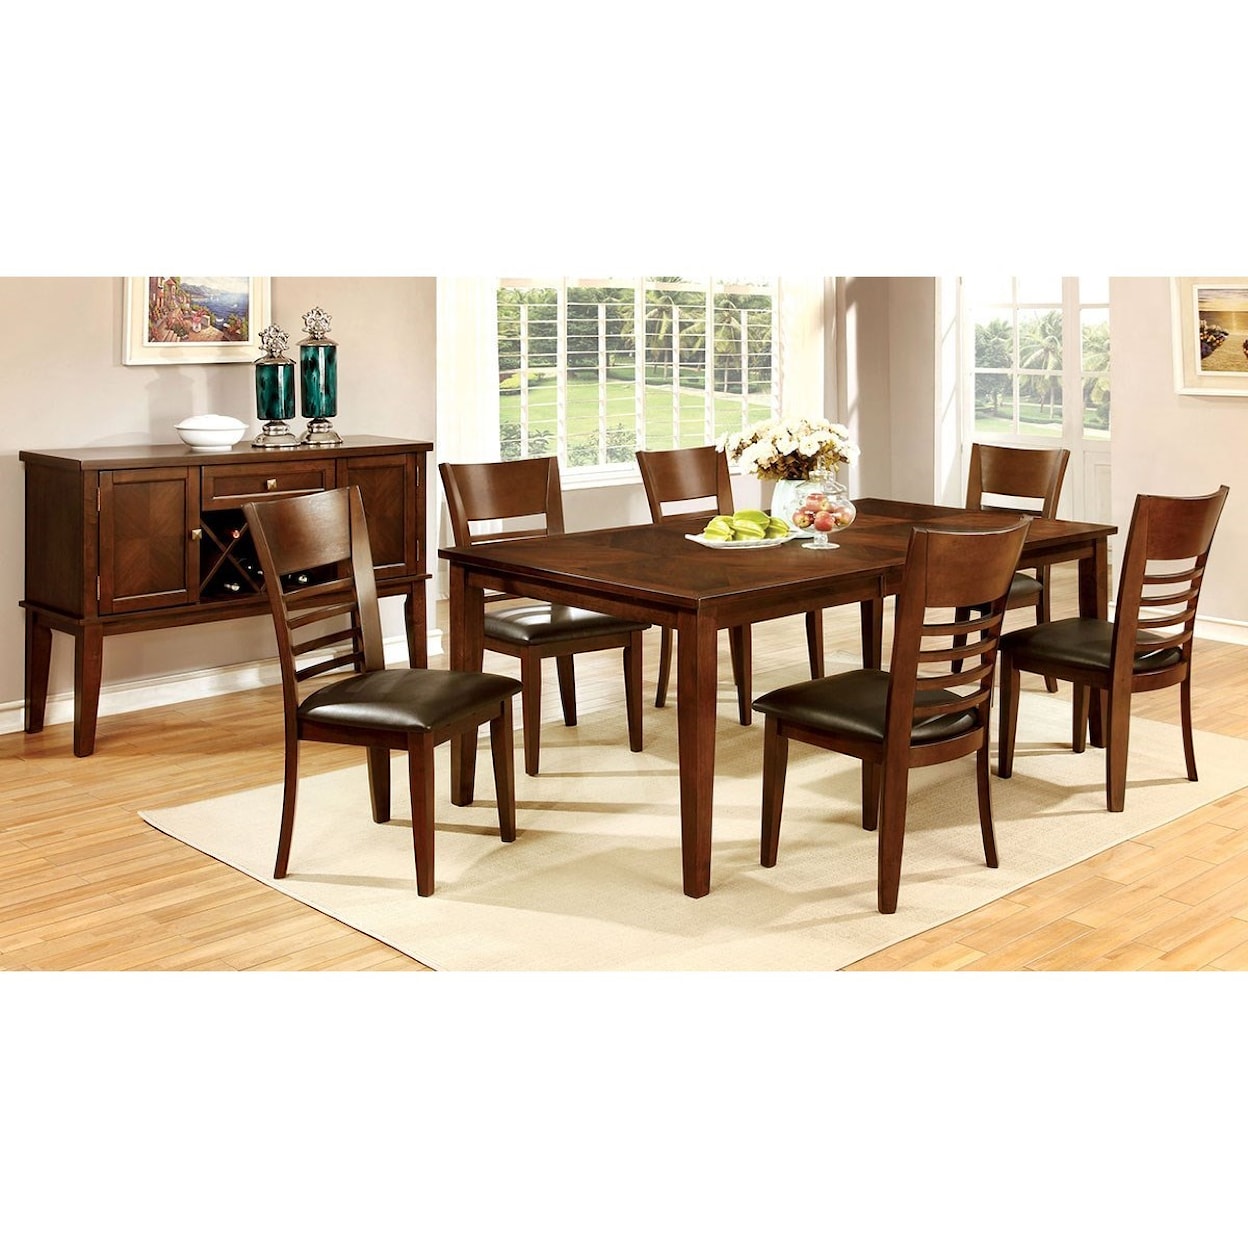 FUSA Hillsview Dining Table